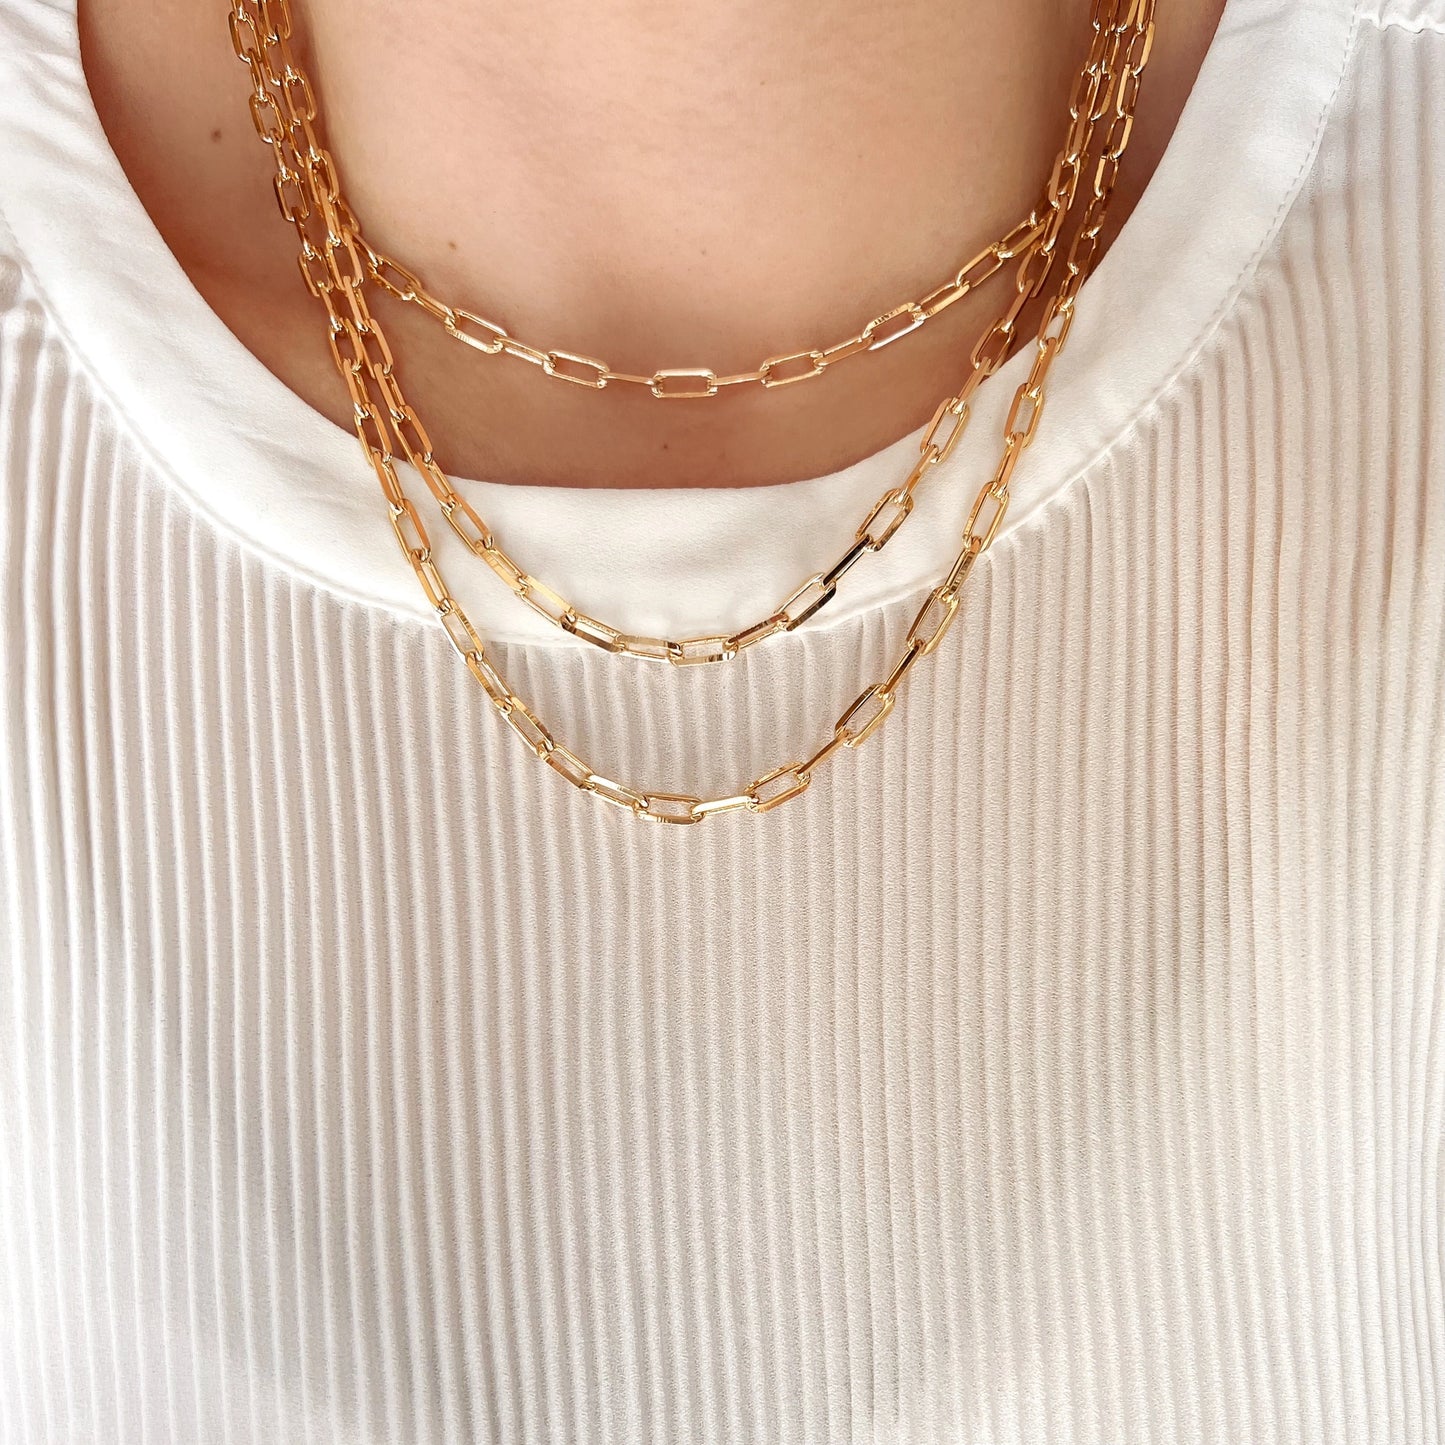 XL GOLD LINK CHARM NECKLACE